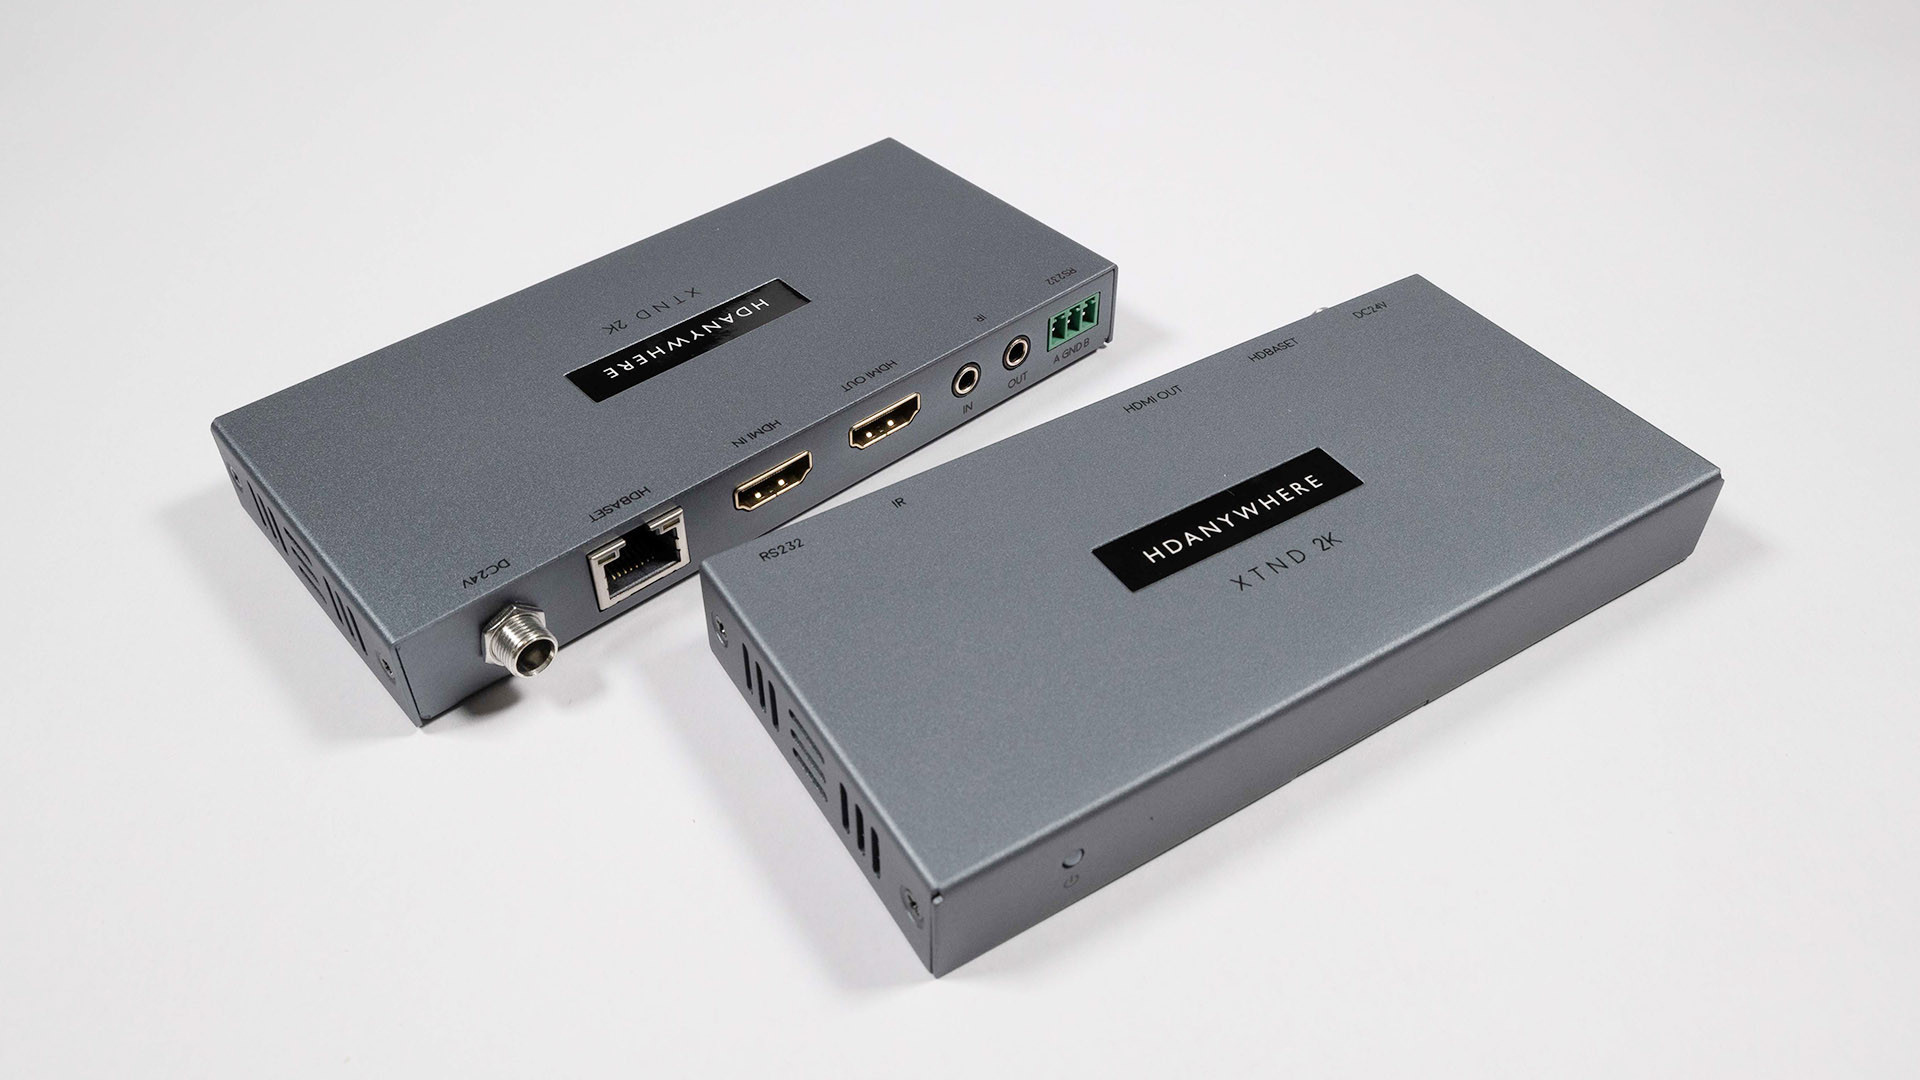 A long-range uncompressed HDMI extender set supporting all